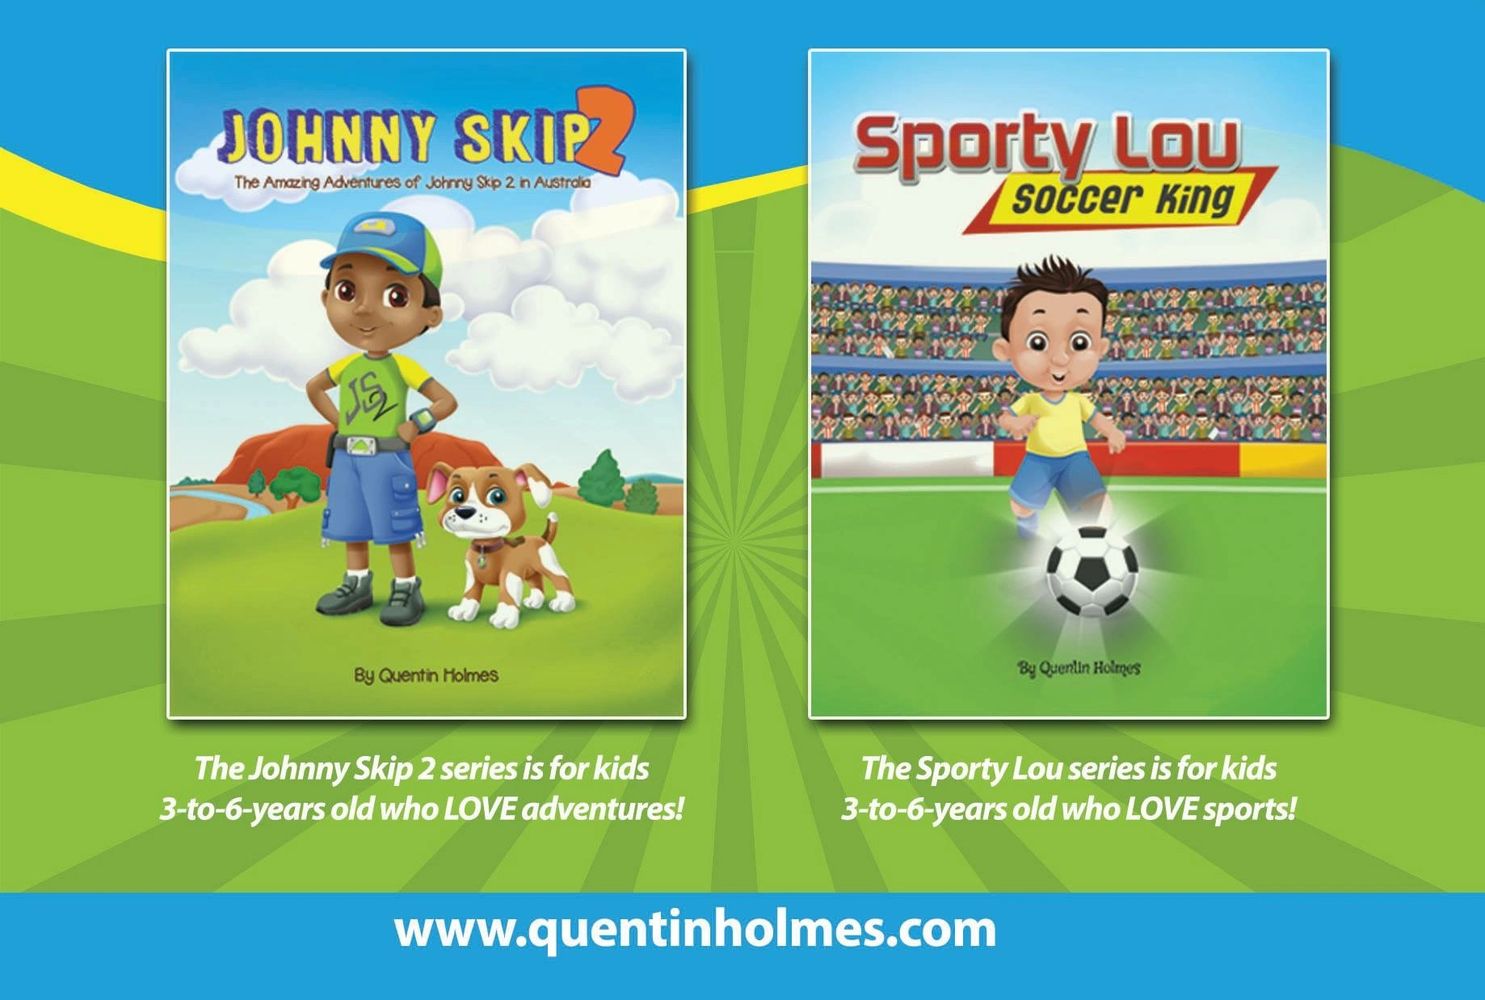 Multicultural Children’s Books by Quentin Holmes 